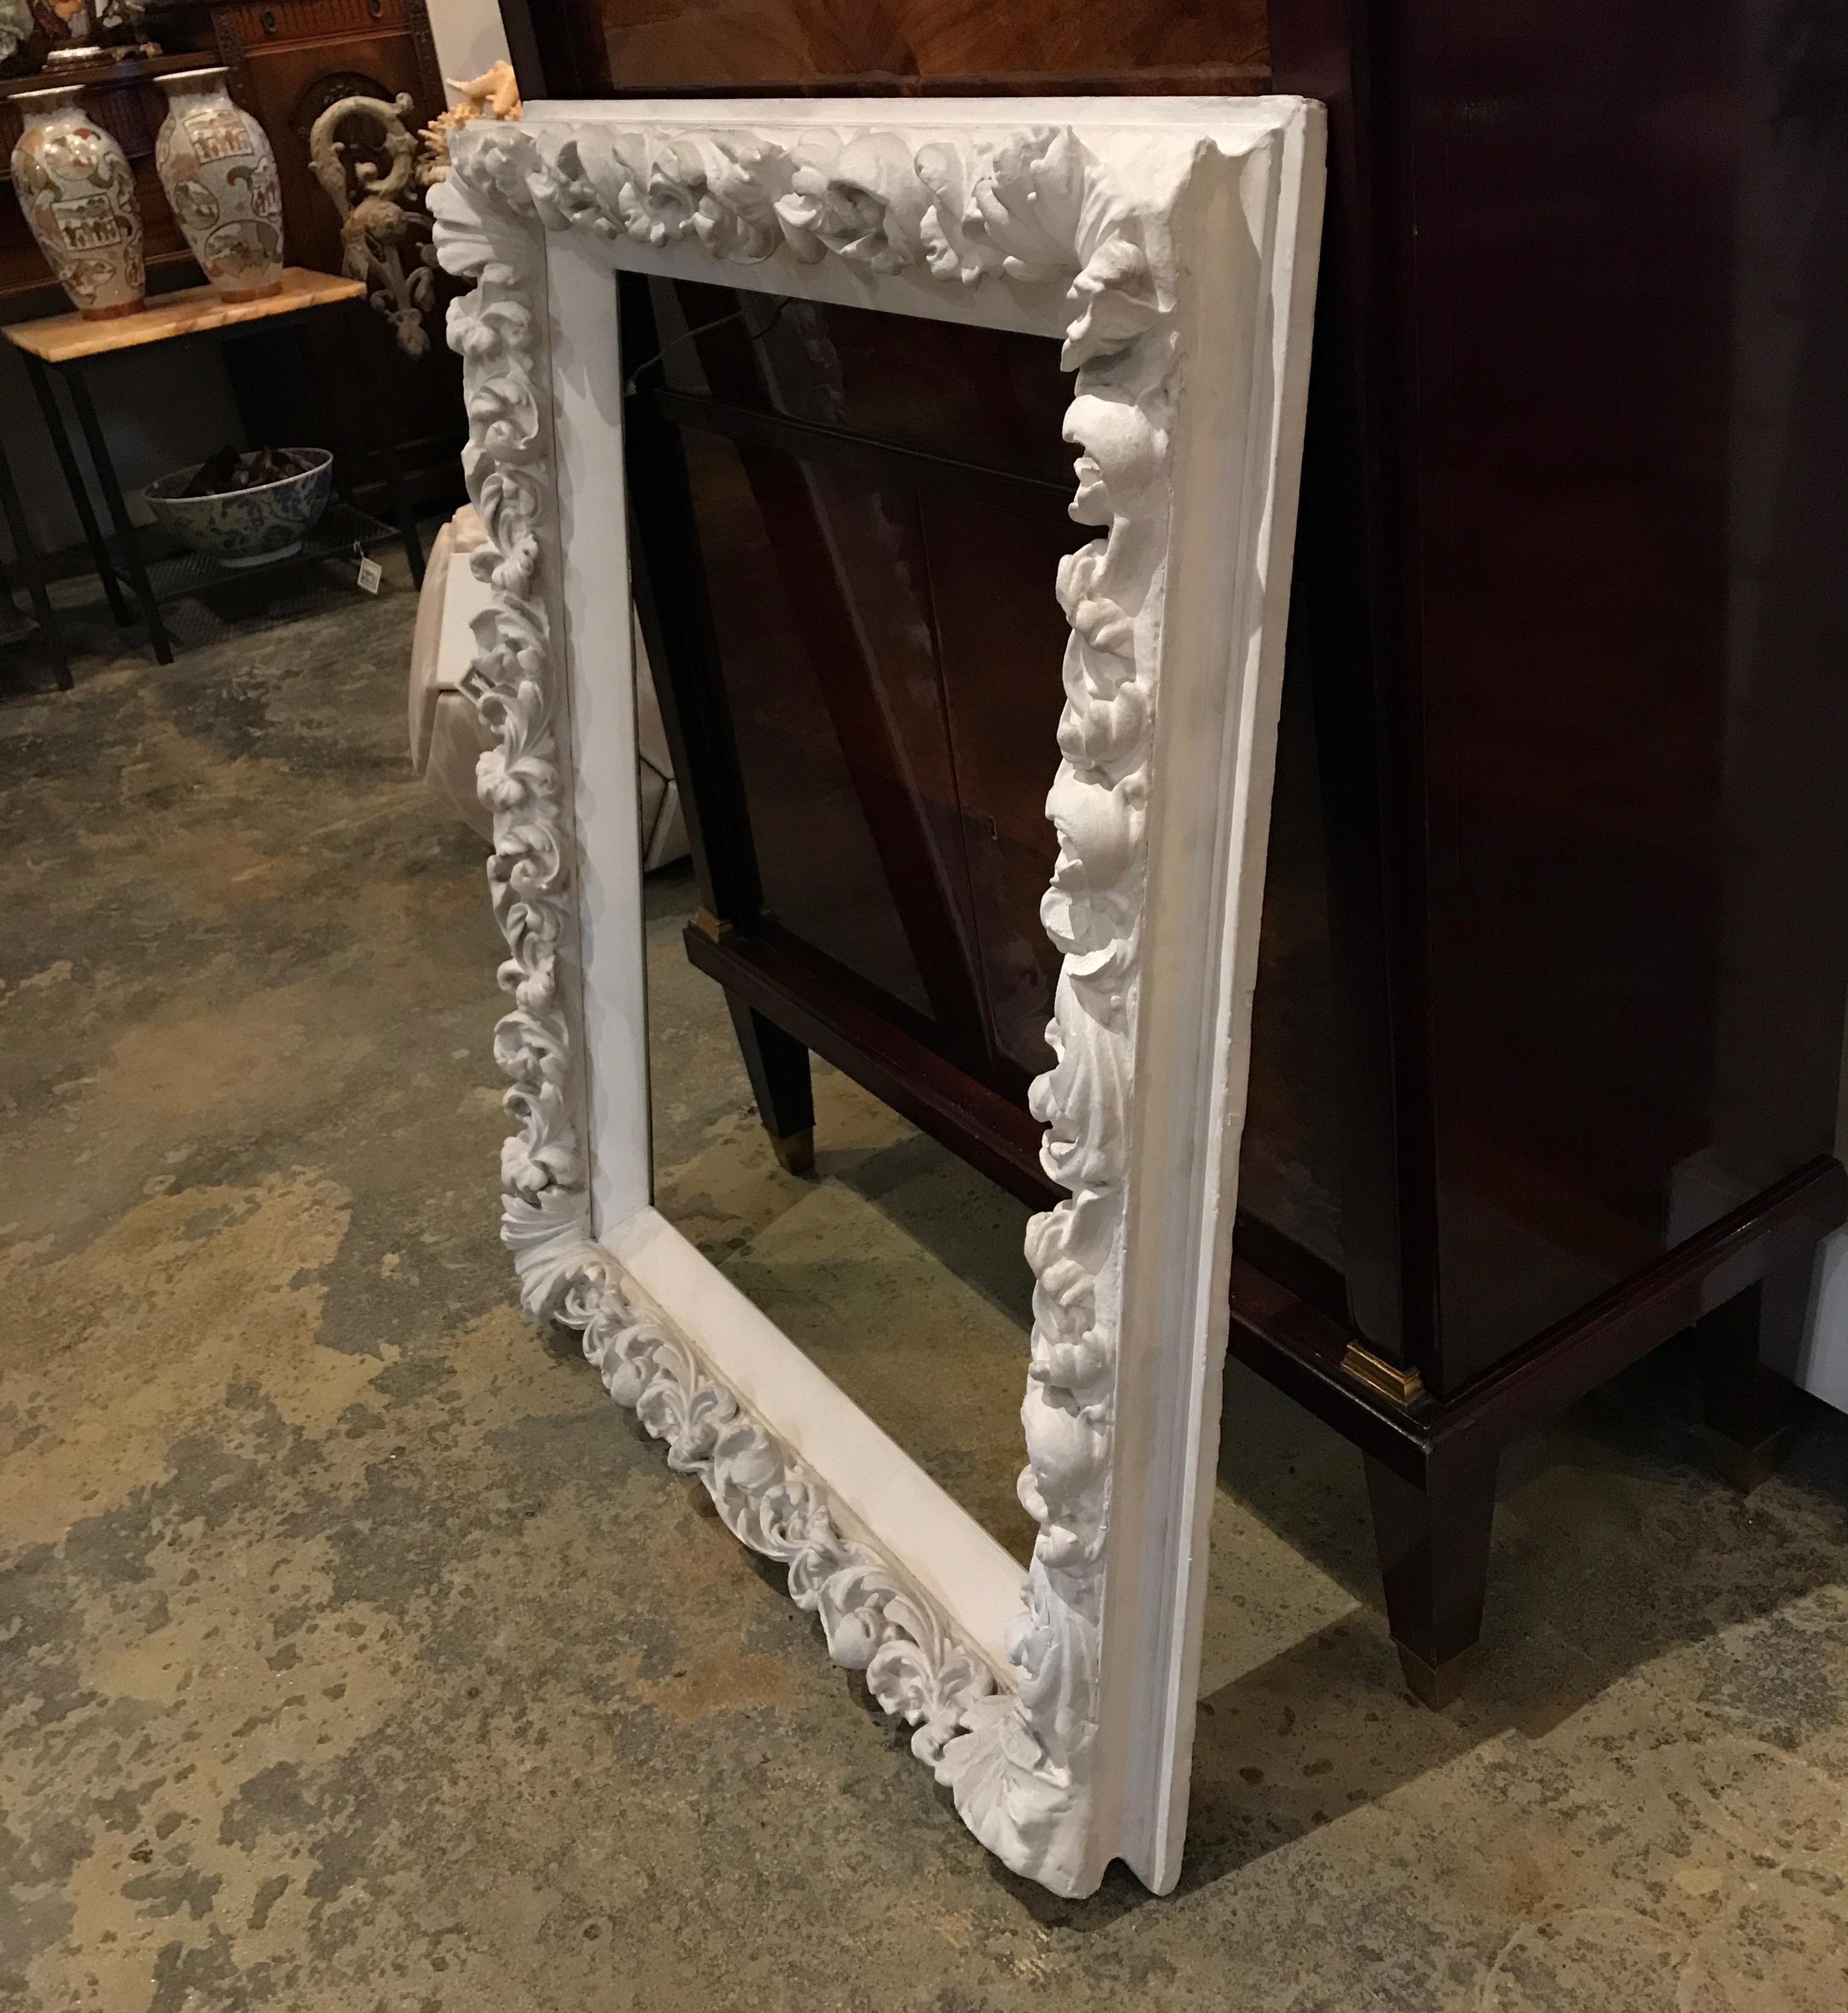 This thick, large wooden frame is hand carved and painted in a white plaster like paint to match the protruding sweeping and flowing plaster-made floral and leafy shapes.